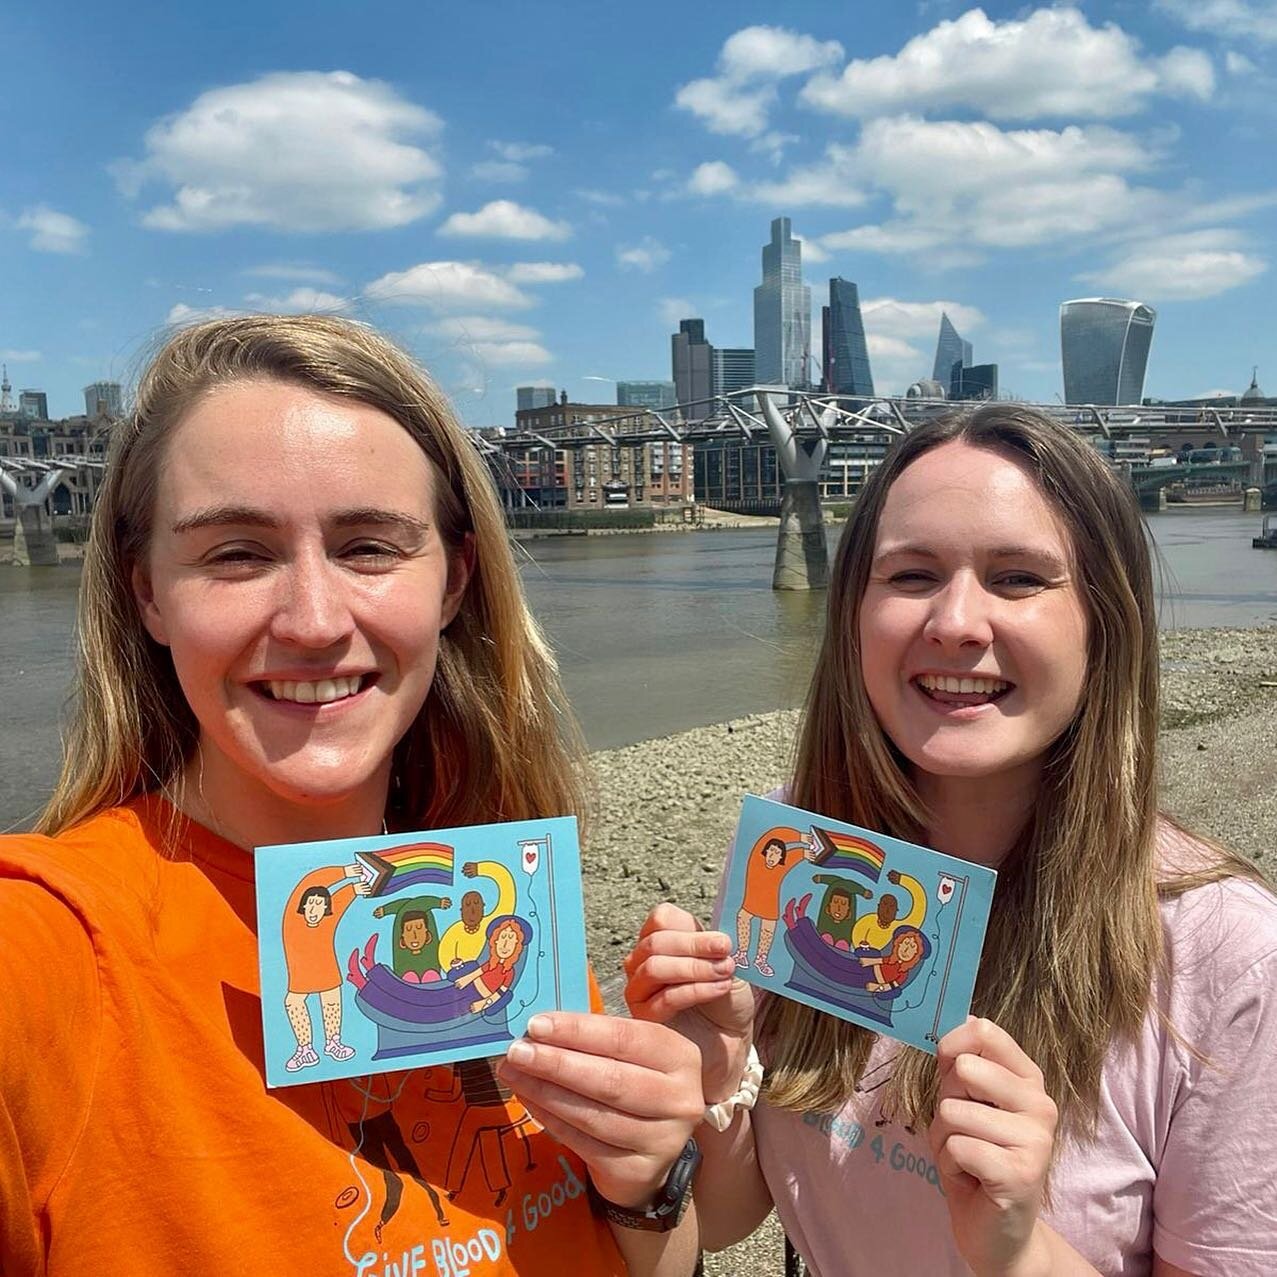 Don&rsquo;t miss out on your chance to sign up for our FREE!! postcard subscription!

We&rsquo;re so happy with the designs that @isseyillustrates has developed for us, and hope that this initiative will encourage more regular donations over the next